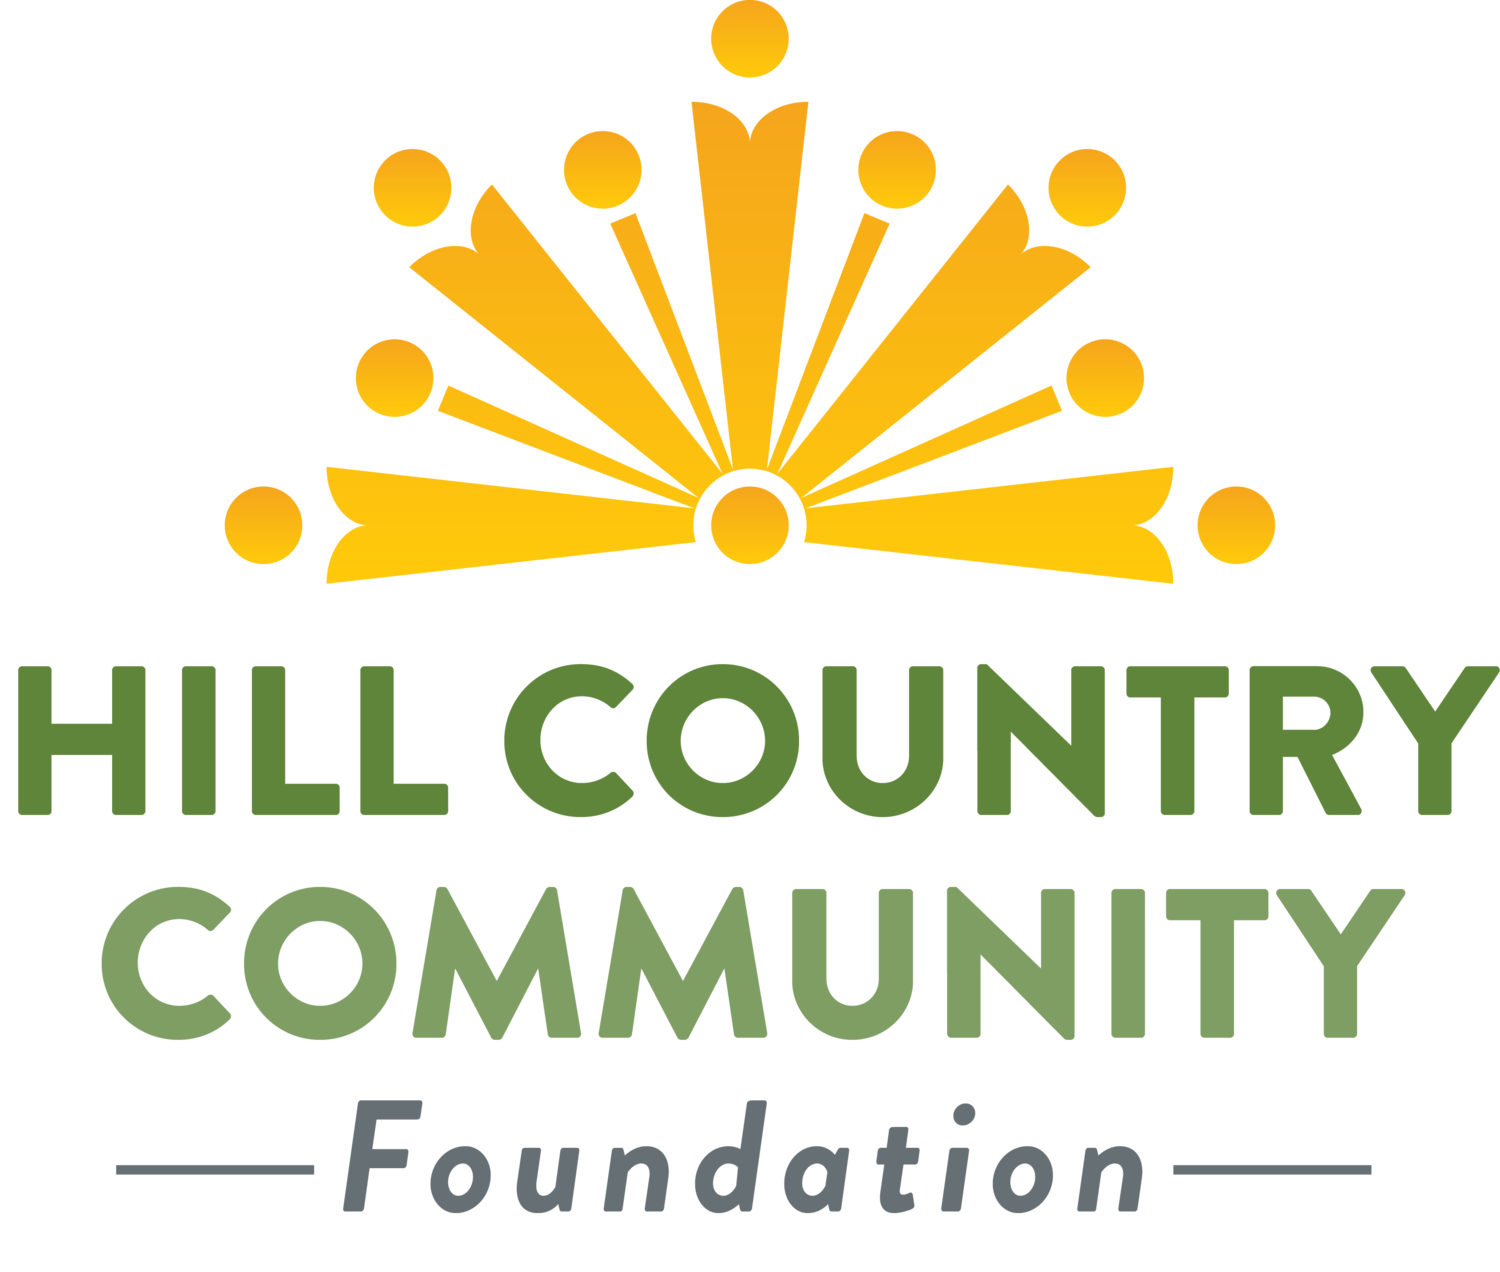 Hill Country Community Foundation